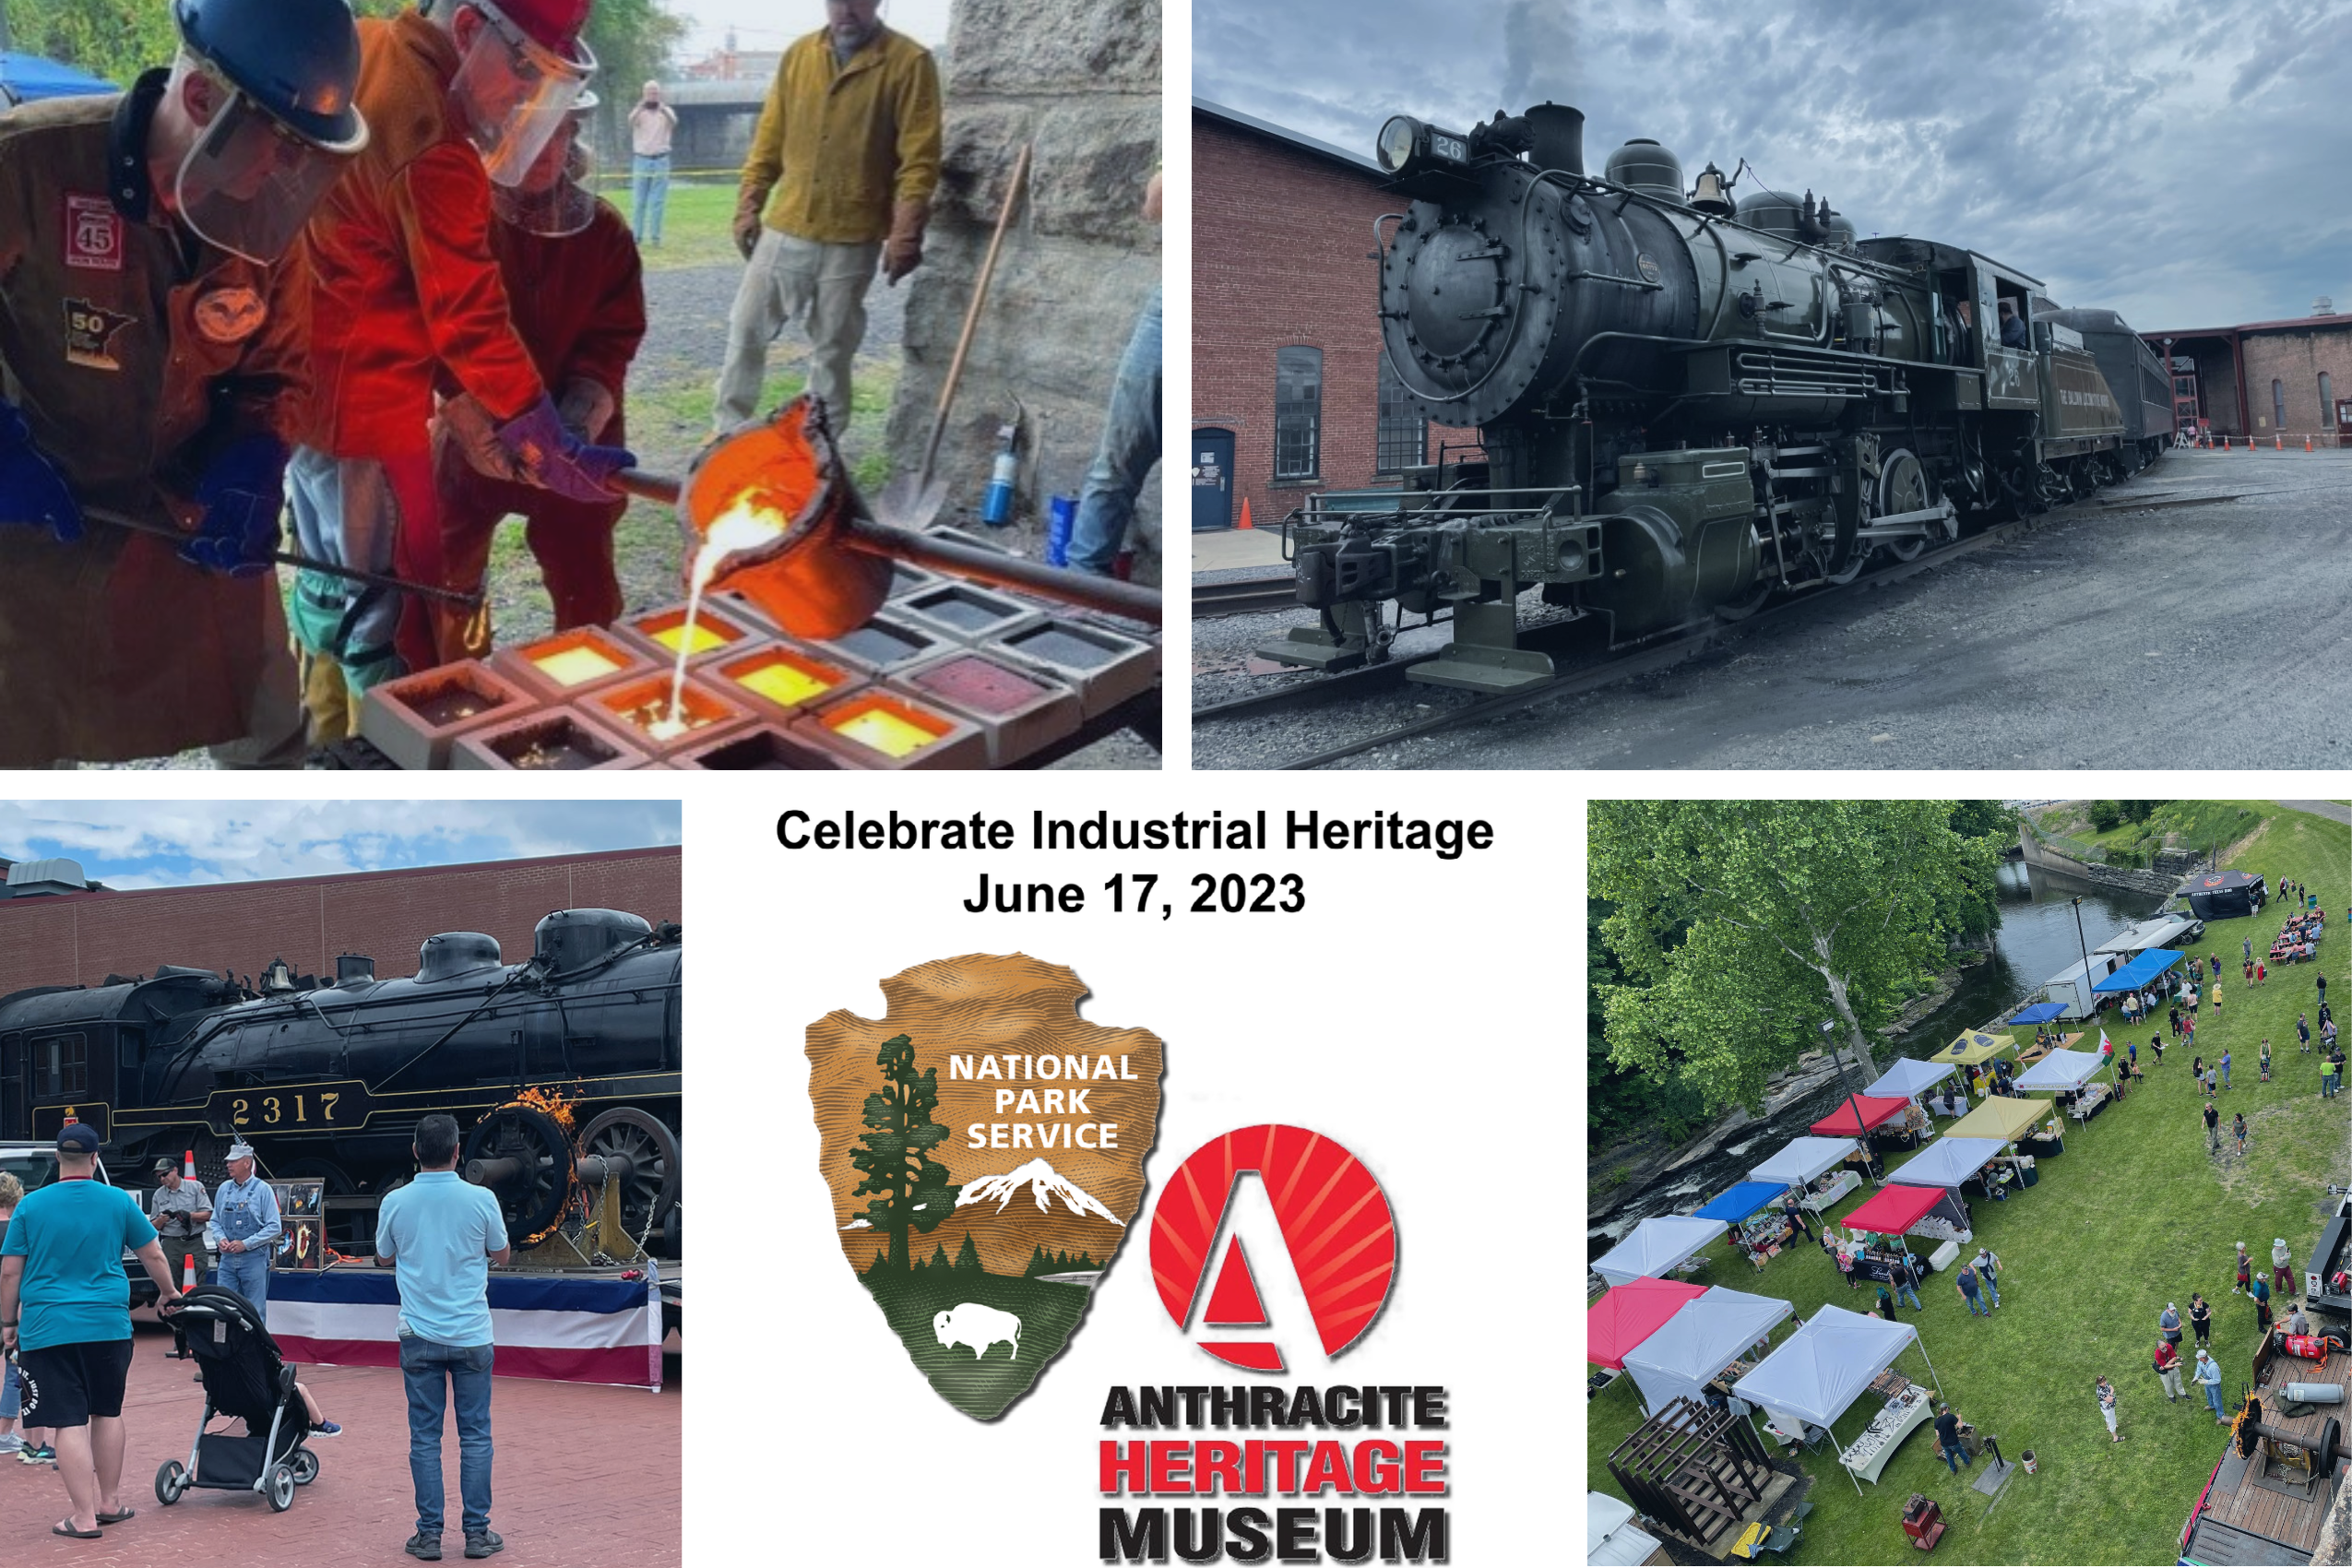 a collage of 4 images showing trains, pop up tents, and pouring molten iron